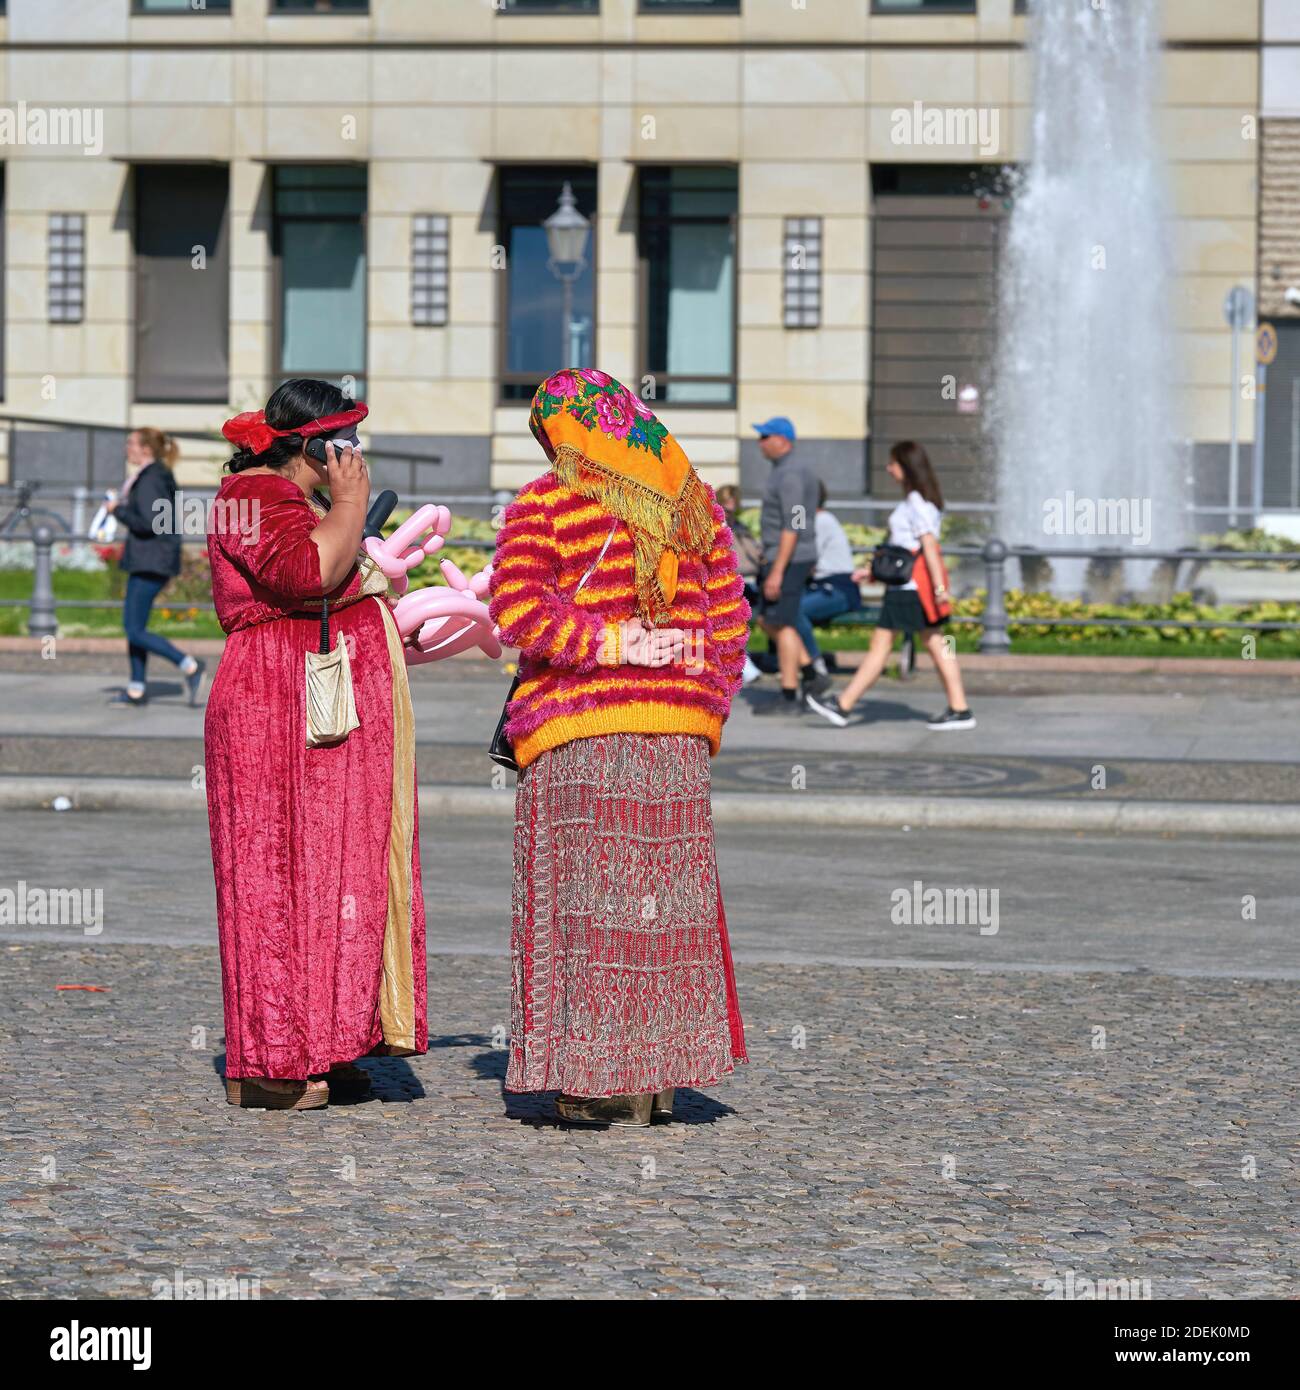 Members of the Roma ethnic group as street artists in the city centre of Berlin Stock Photo